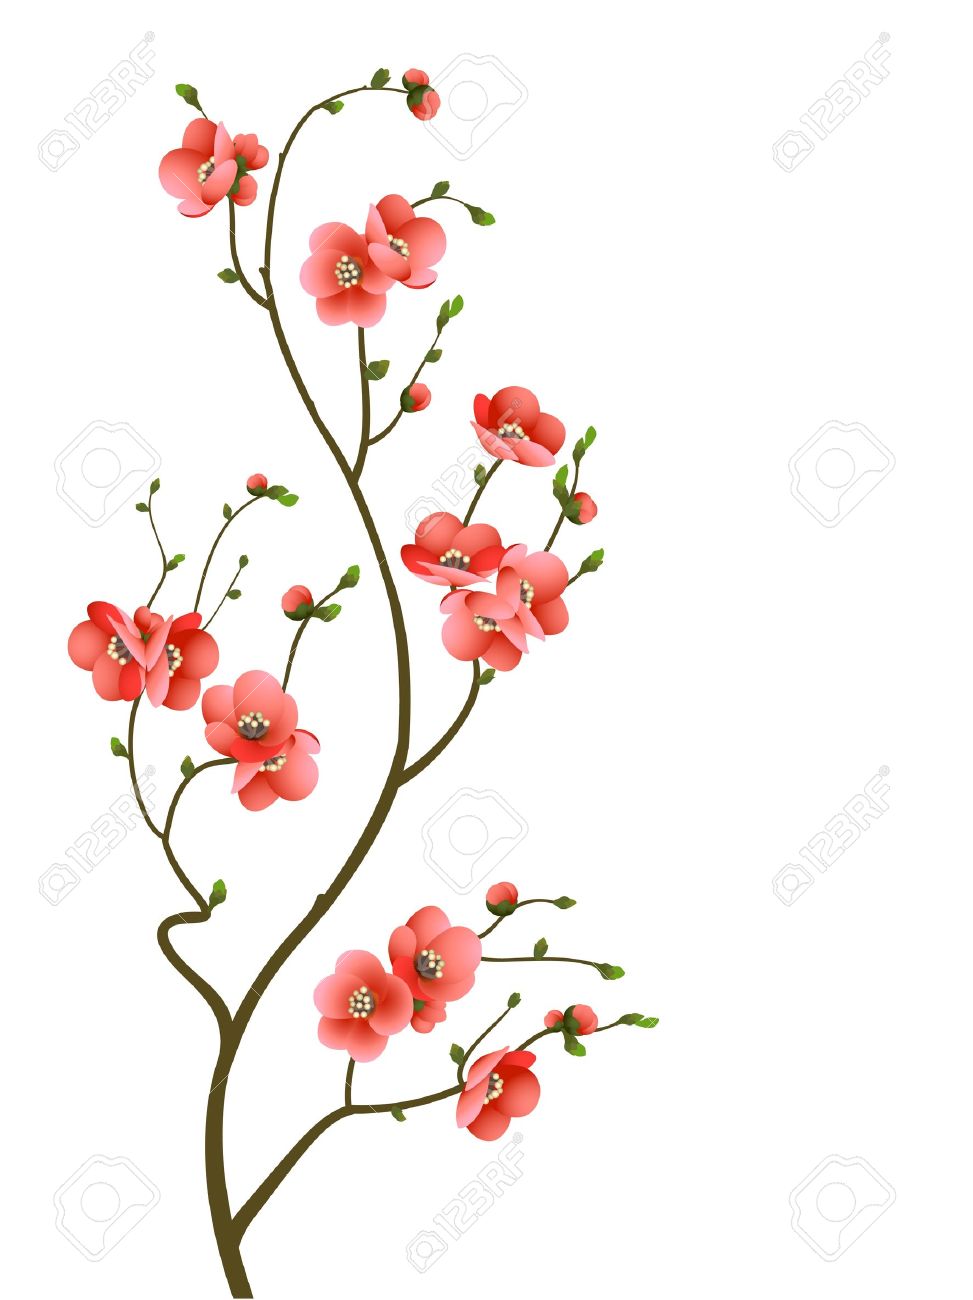 abstract background with cherry blossom branch isolated.